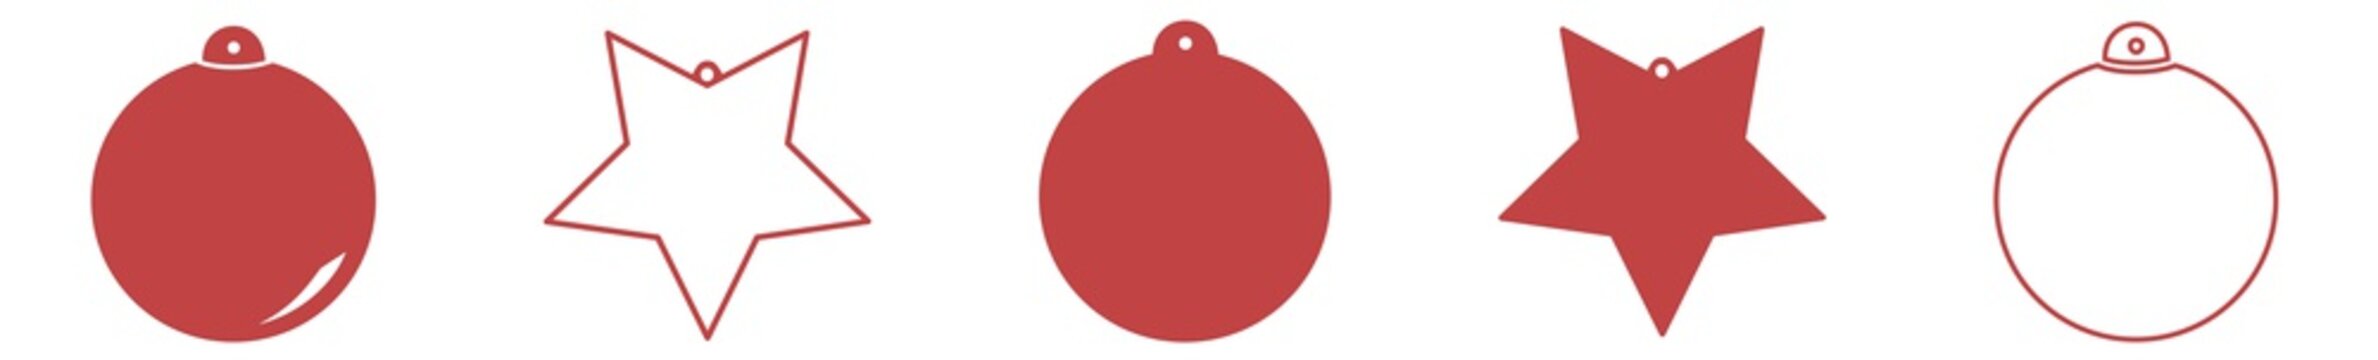 Christmas Bauble Icon Red | Xmas Ball Ornaments | Variations